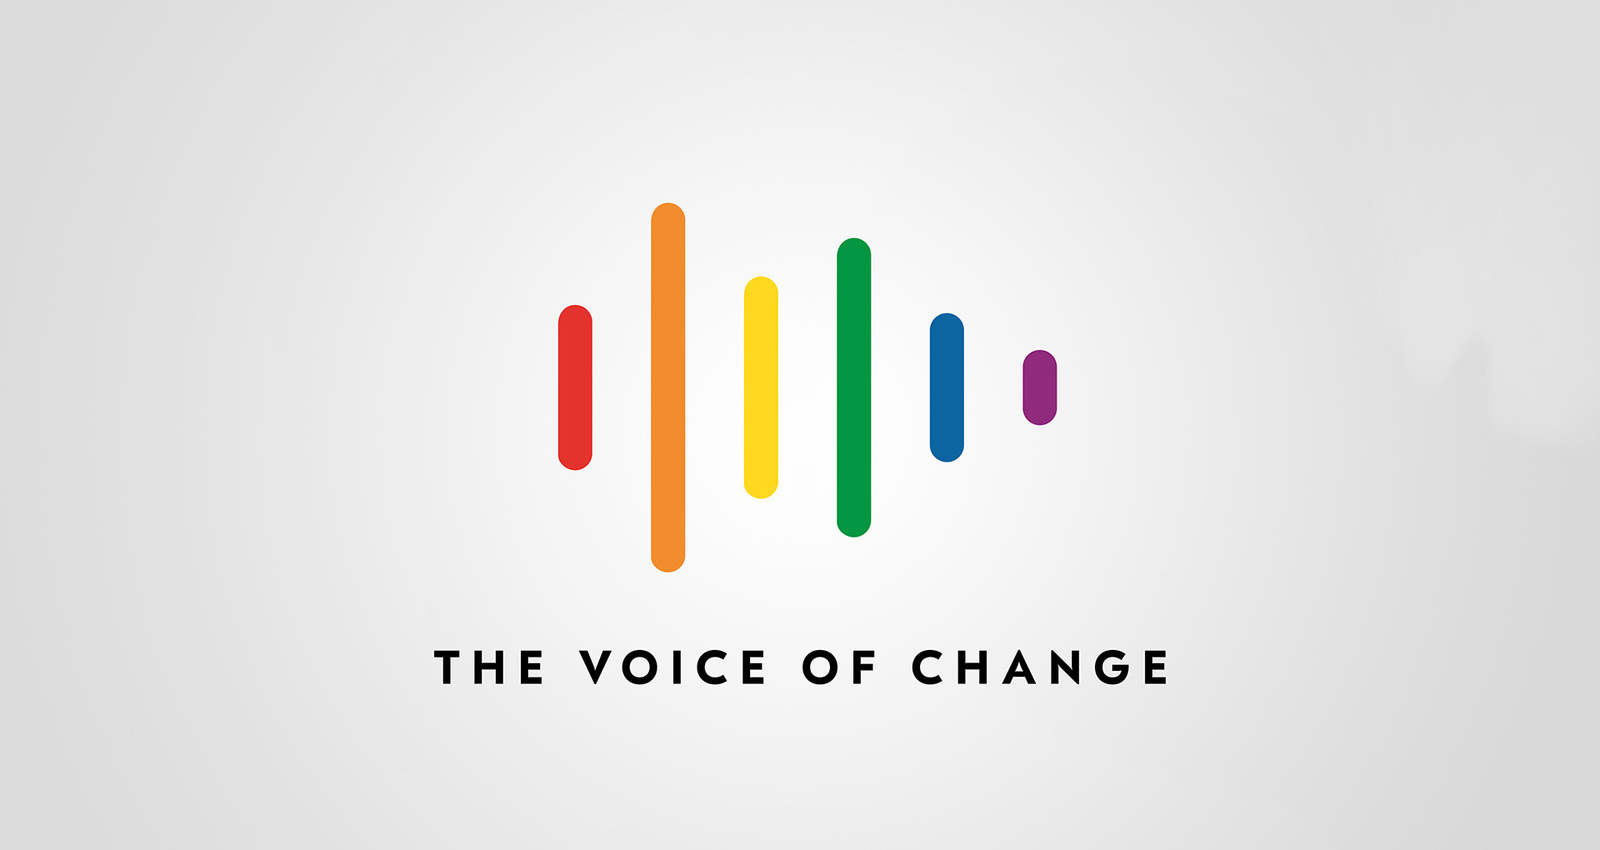 The Voice of Change